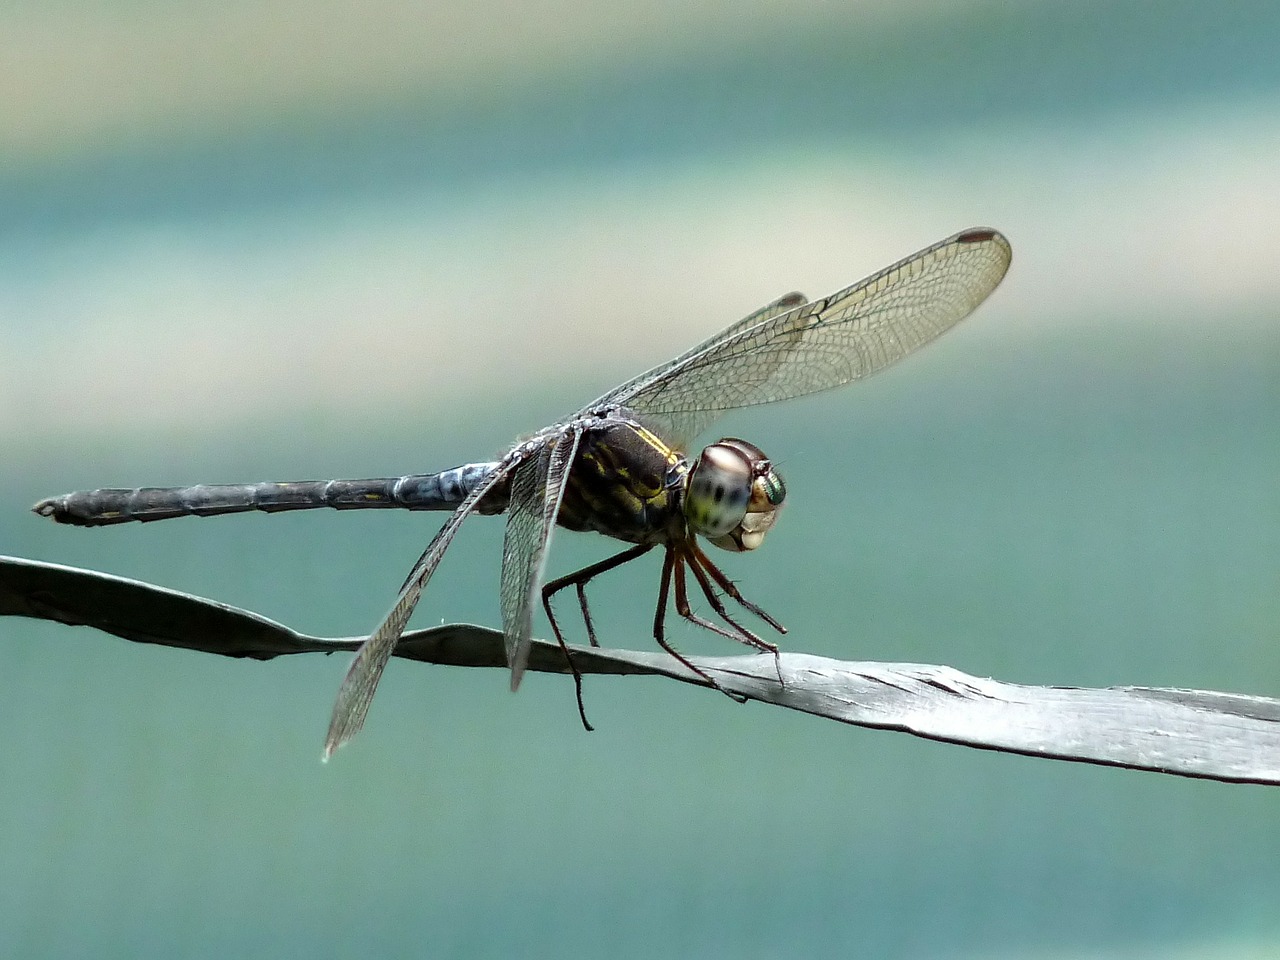 cratilla lineata emerald banded skimmer insect free photo